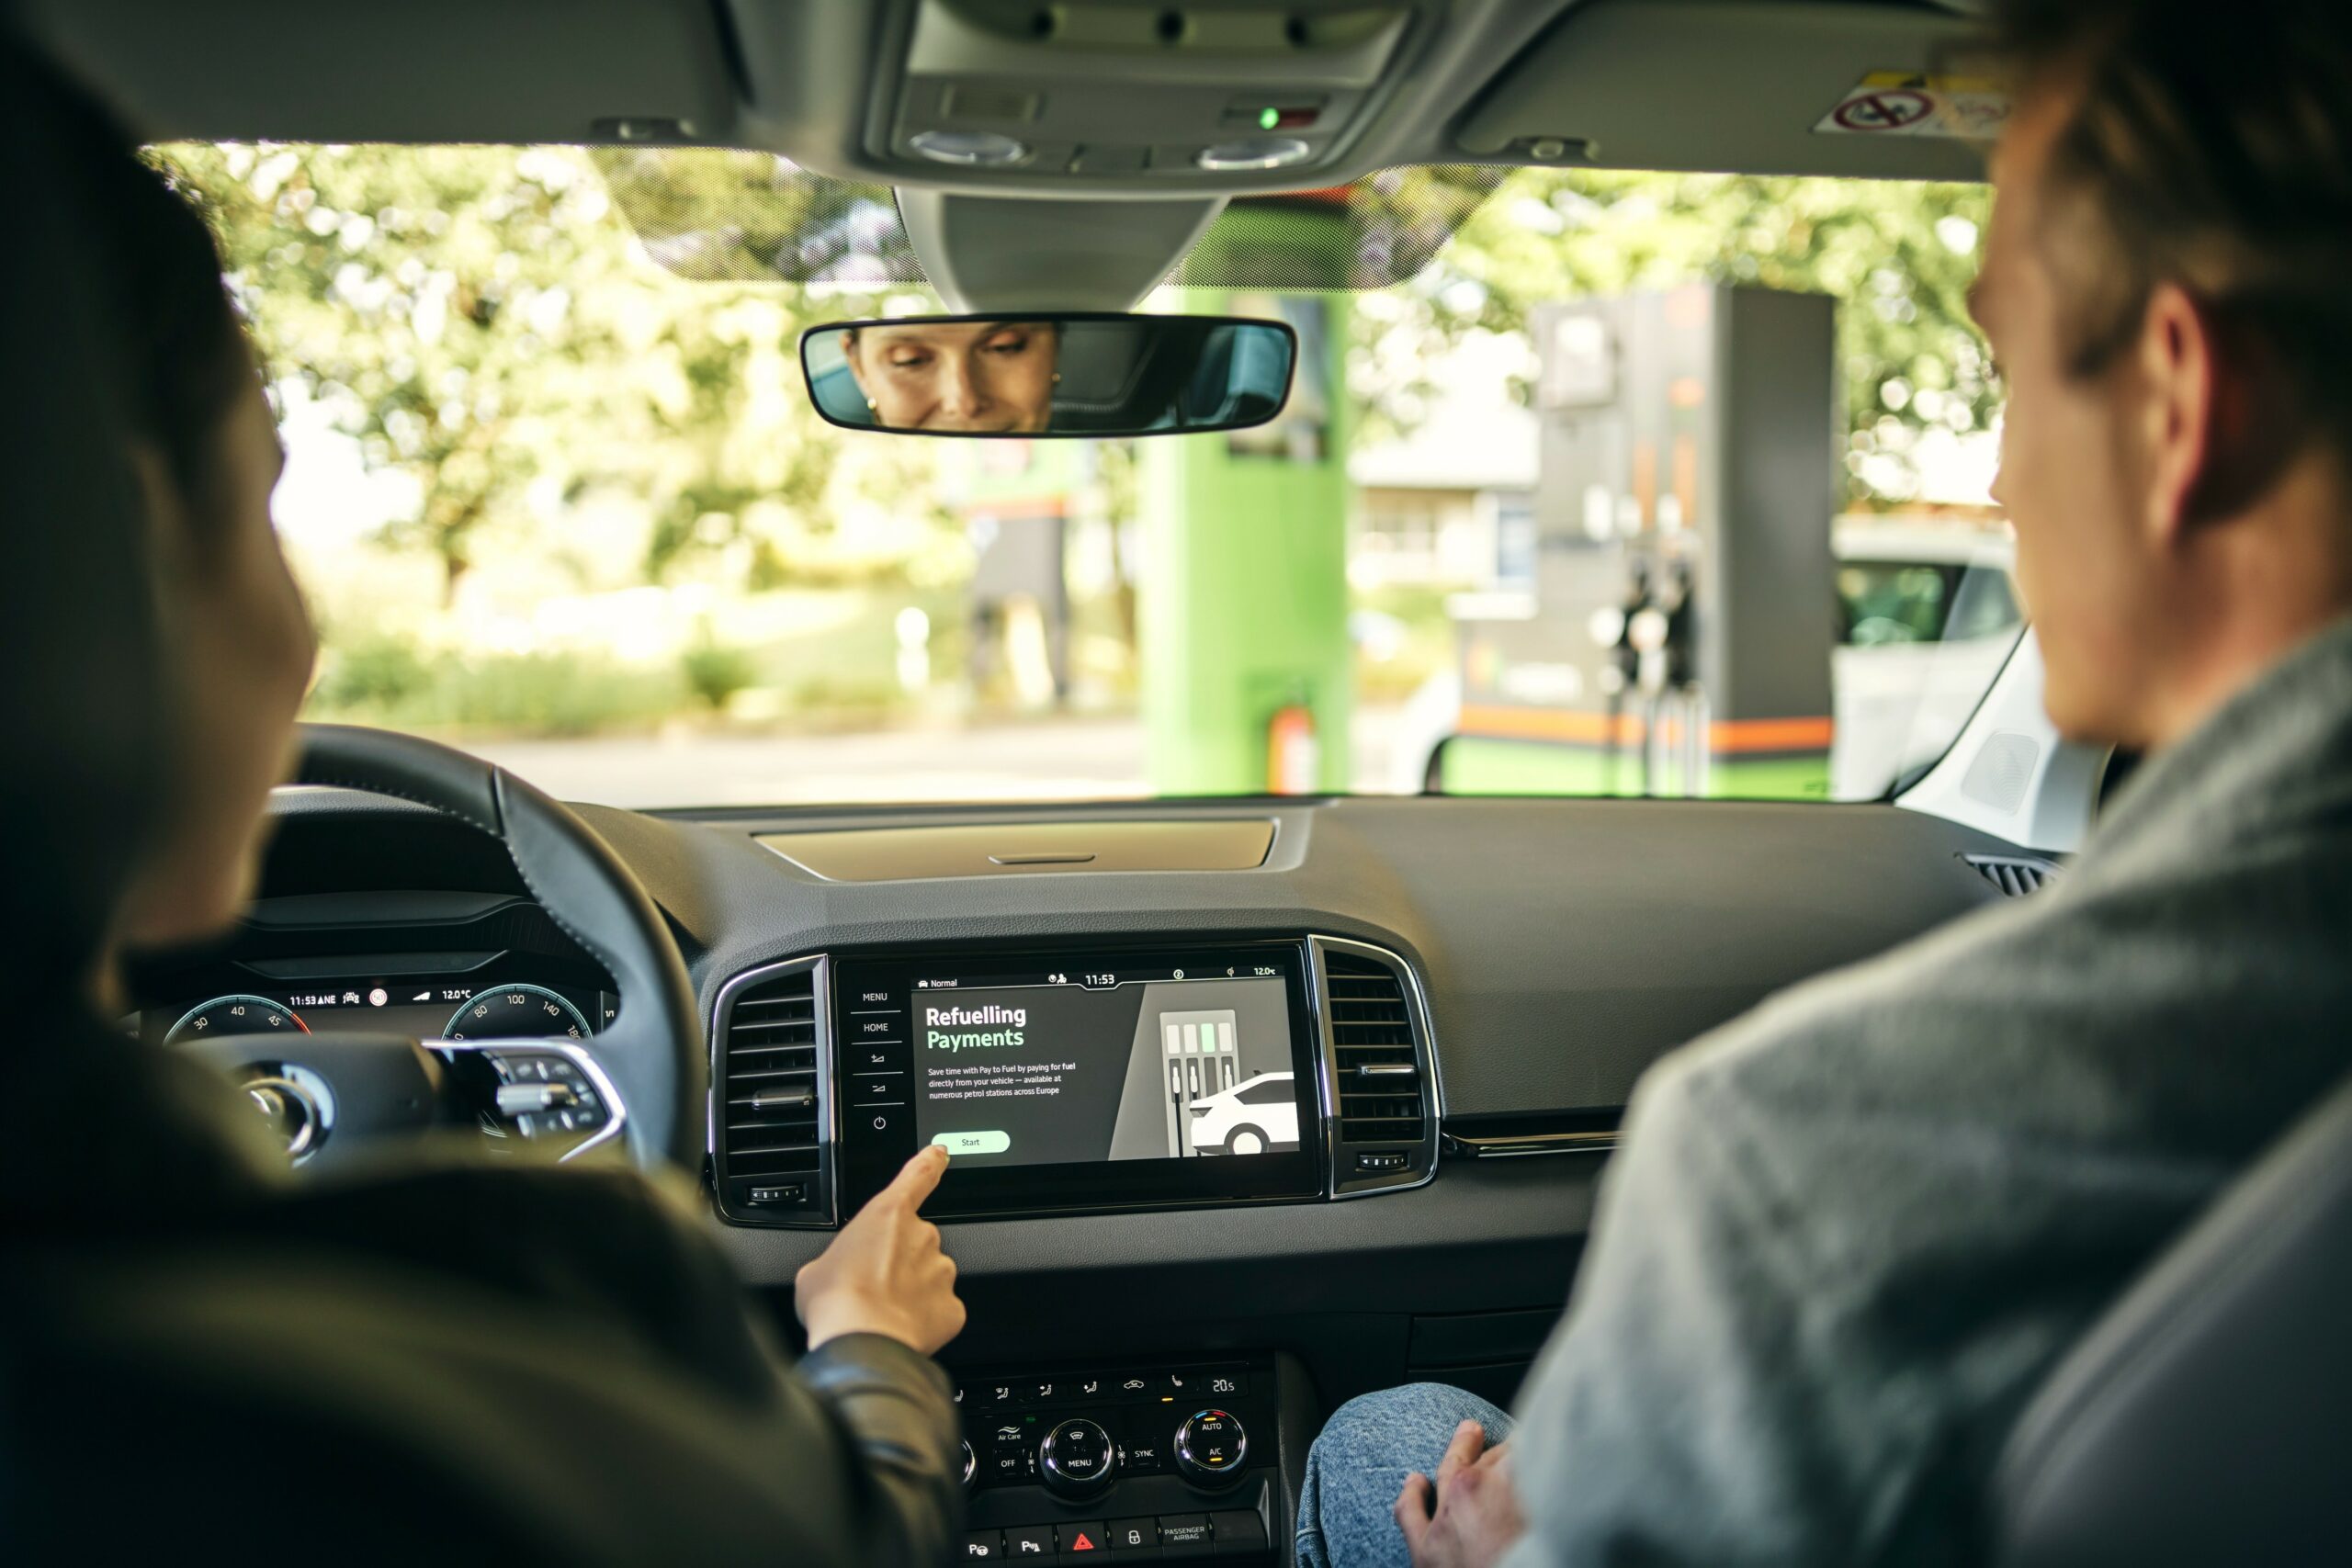 Škoda partners with Parkopedia to introduce convenient in-car payments with new Pay to Fuel service